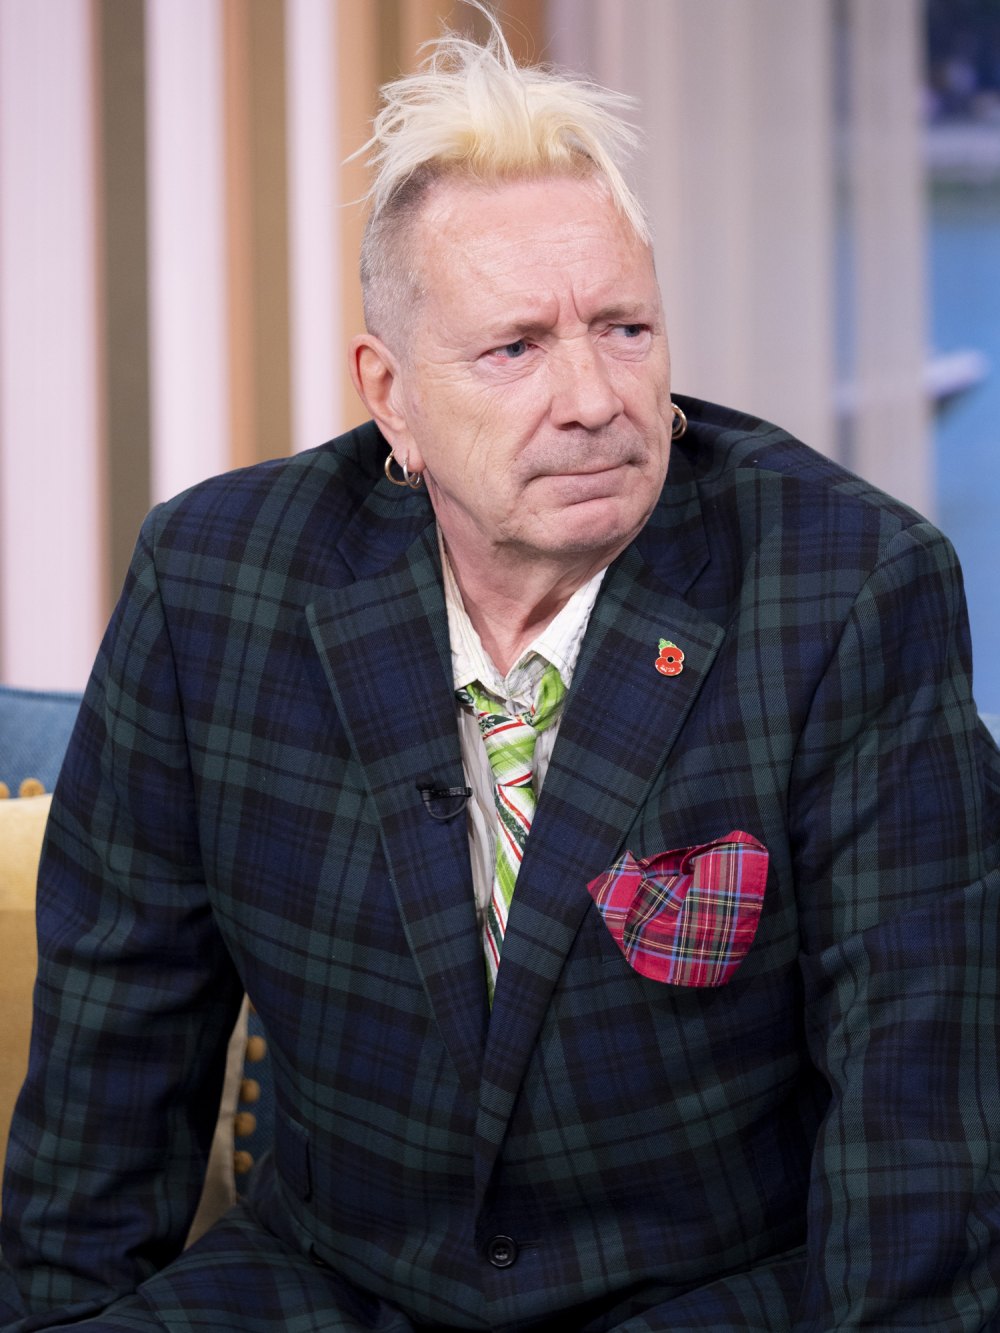 Sex Pistols' John Lydon Criticizes Prince Harry and Meghan Markle's Drama With the Royal Family